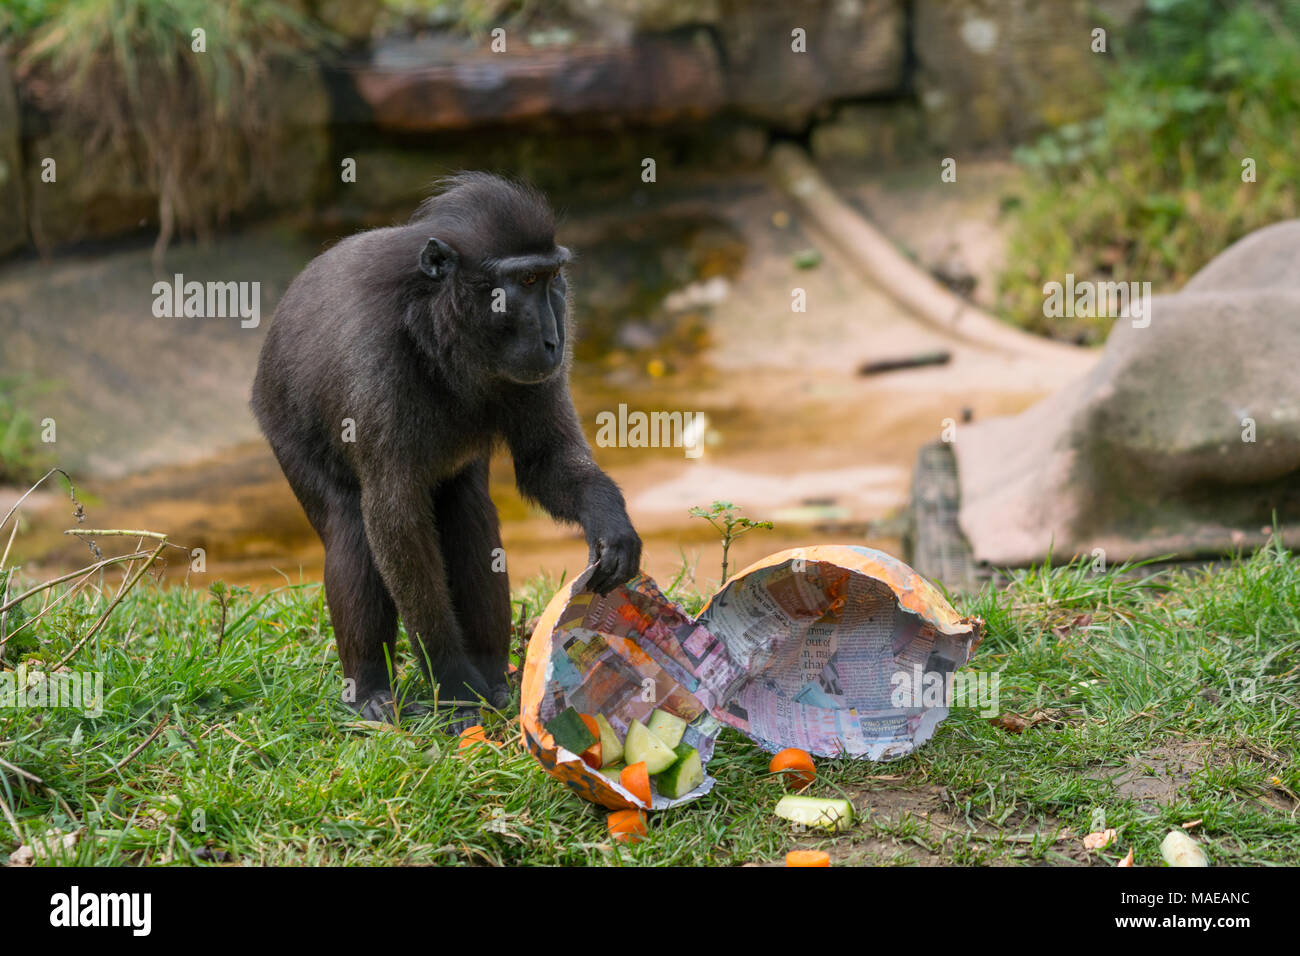 01/04/2018 Jersey,Channel Islands.A crested Black Macaque plays with an improvised Easter Egg which contained various fruits & vegetables. The eggs were made by staff and given out during feeding time at the Jersey Zoo,Jersey,Channel islands. Credit: imagegallery2/Alamy Live News Stock Photo